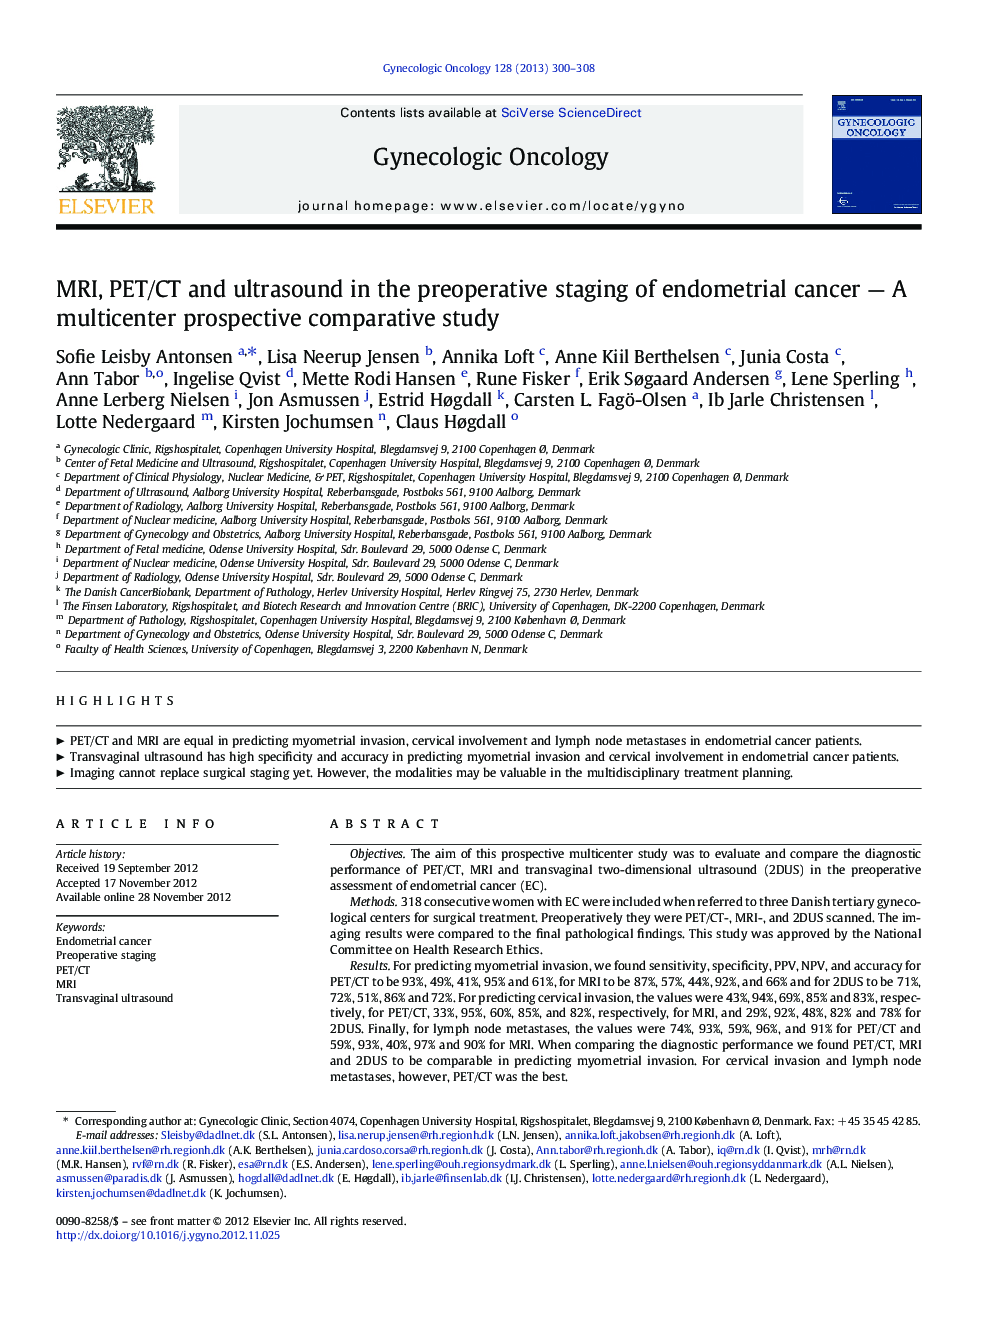 MRI, PET/CT and ultrasound in the preoperative staging of endometrial cancer — A multicenter prospective comparative study